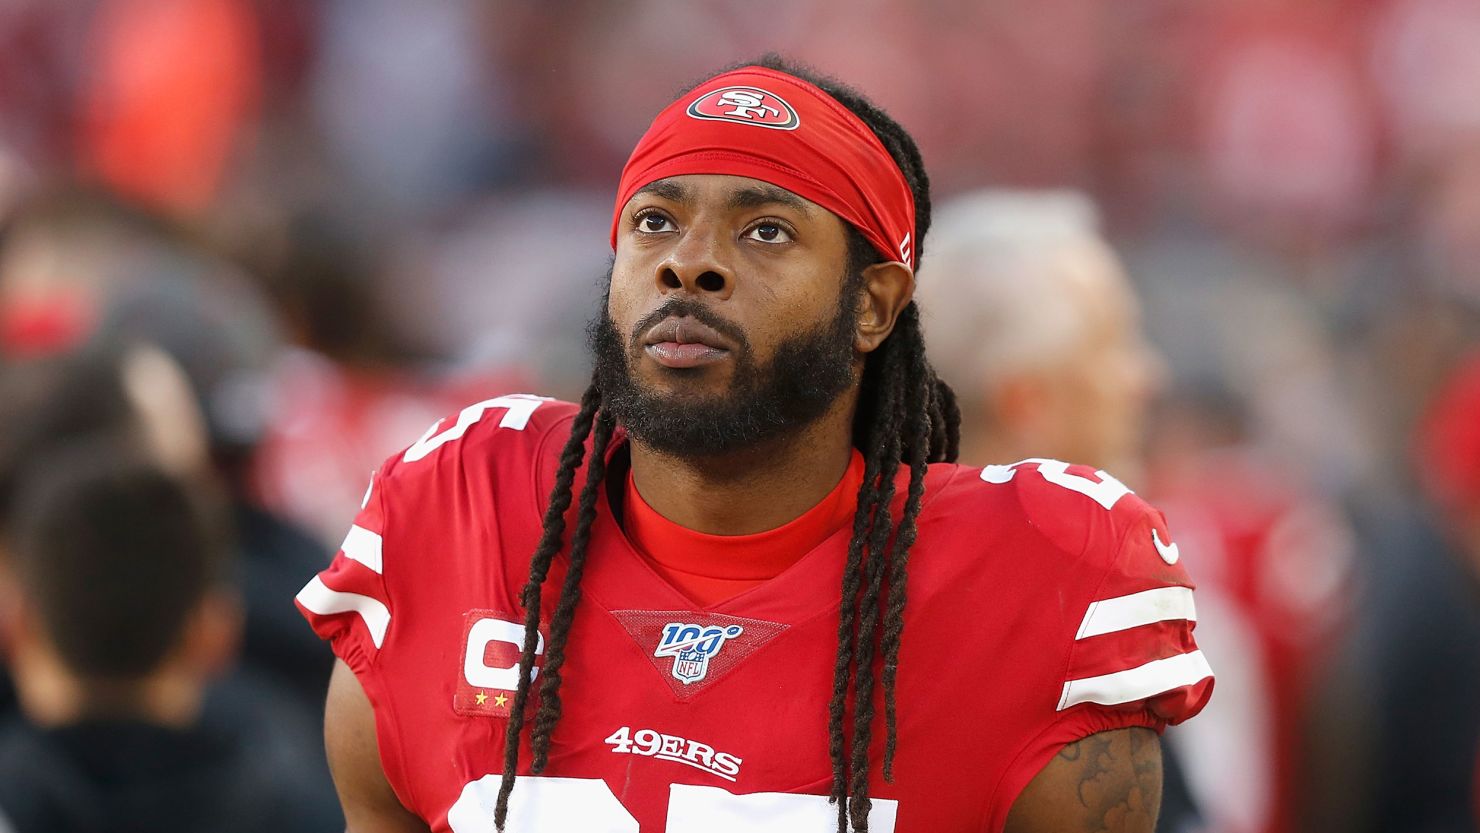 Richard Sherman most recently played for the San Francisco 49ers.